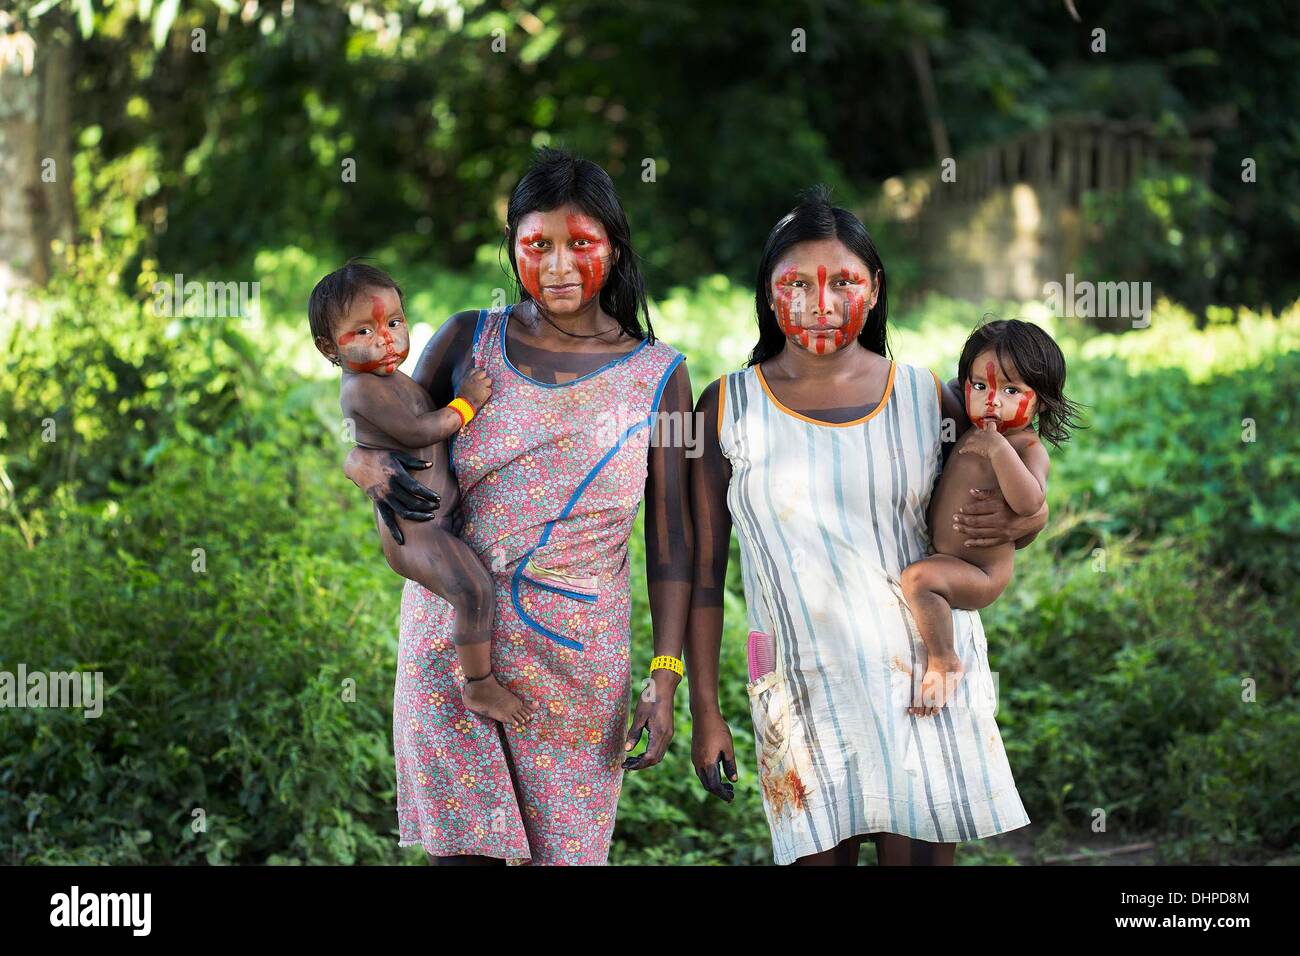 May 2, 2013 - Poti-Kro, Para, Brazil - Nhakri And Nhgreiproti, Xikrin women in the village of Poti-Kro, stand for a portrait under the fruit trees behind their houses. The indigenous Xikrin people live on the Bacaja, a tributary of the Xingu River, where construction of the Belo Monte Dam is reaching peak construction. Some scientists warn that the water level of the Bacaja will decrease precipitously due to the dam. (Credit Image: © Taylor Weidman/ZUMA Wire/ZUMAPRESS.com) Stock Photo